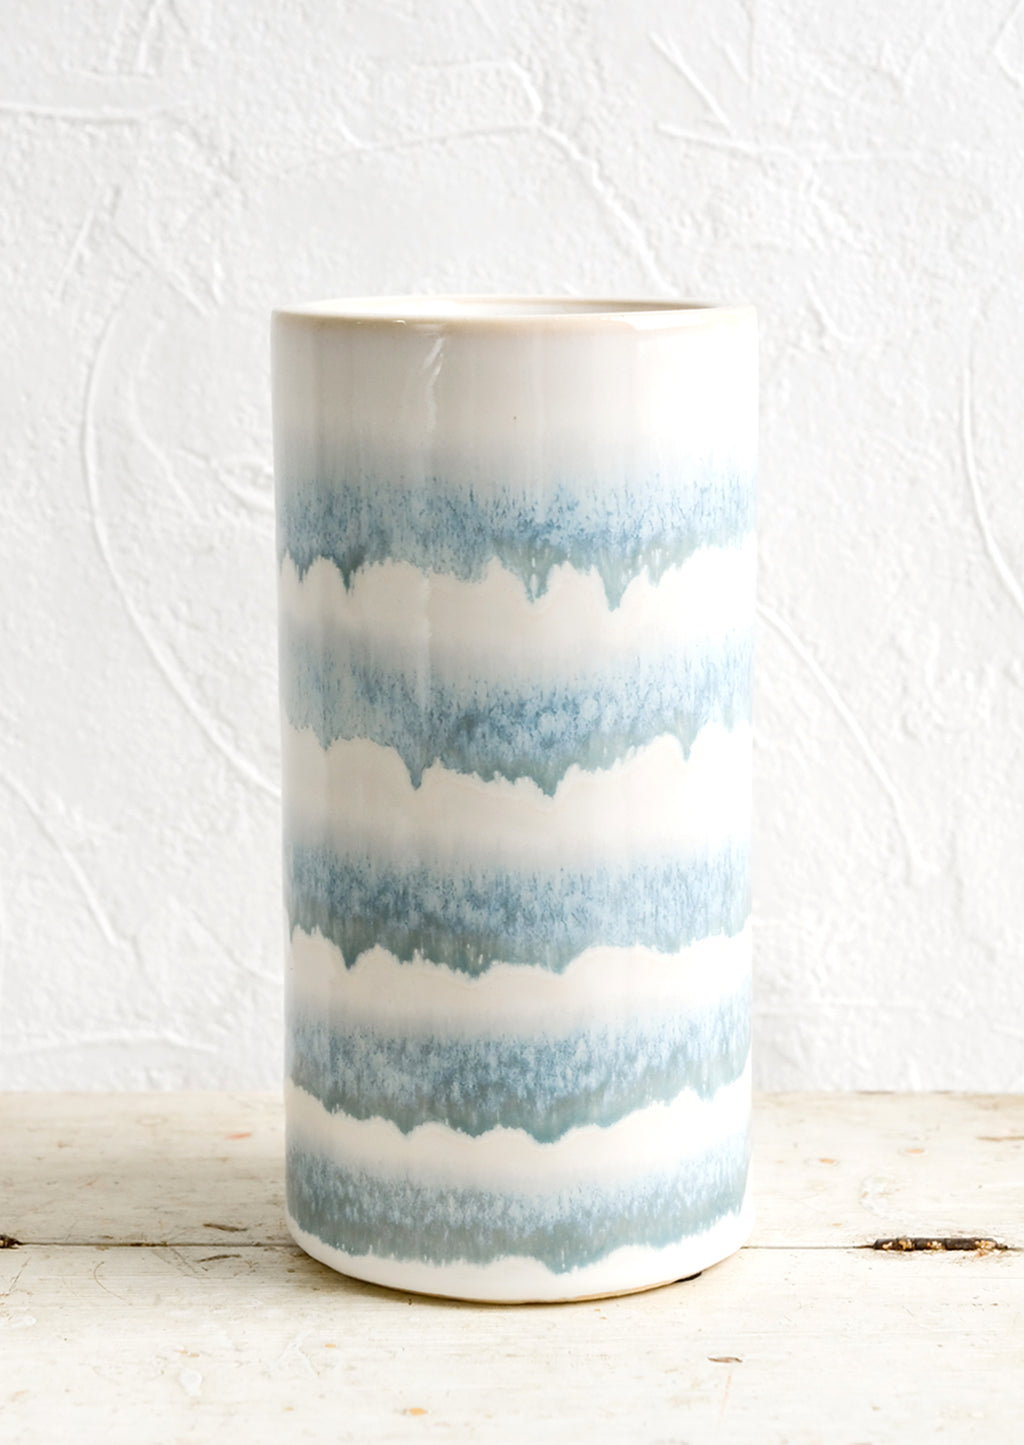 2: A tall cylindrical ceramic vase with blue and white stripes.